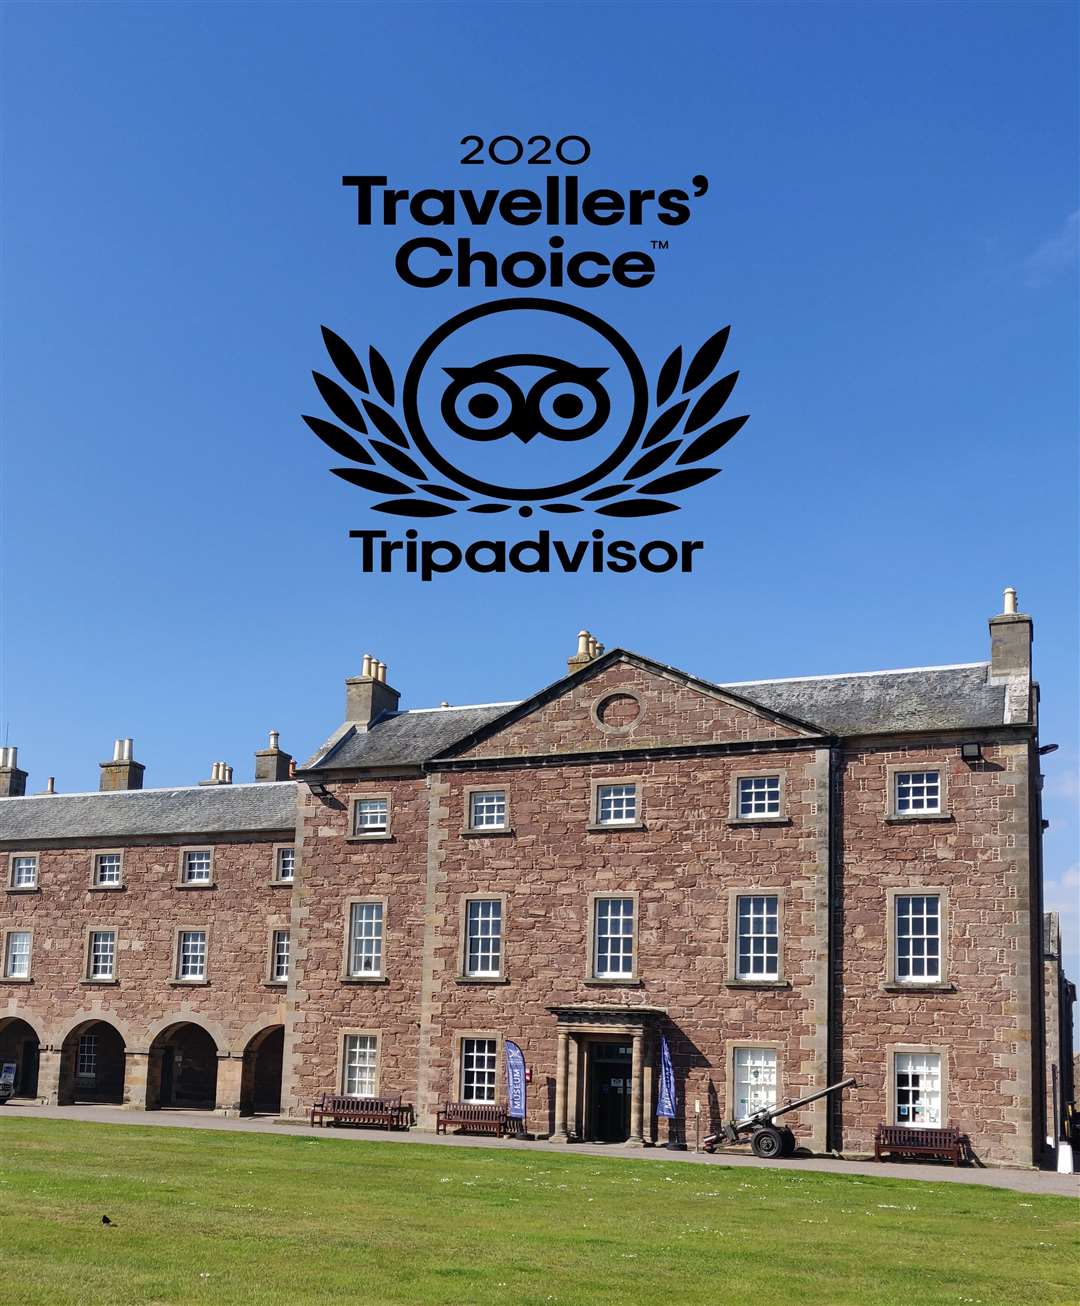 Tripadvisor has awarded the Highlanders' Museum a coveted Travellers' Choice Award.